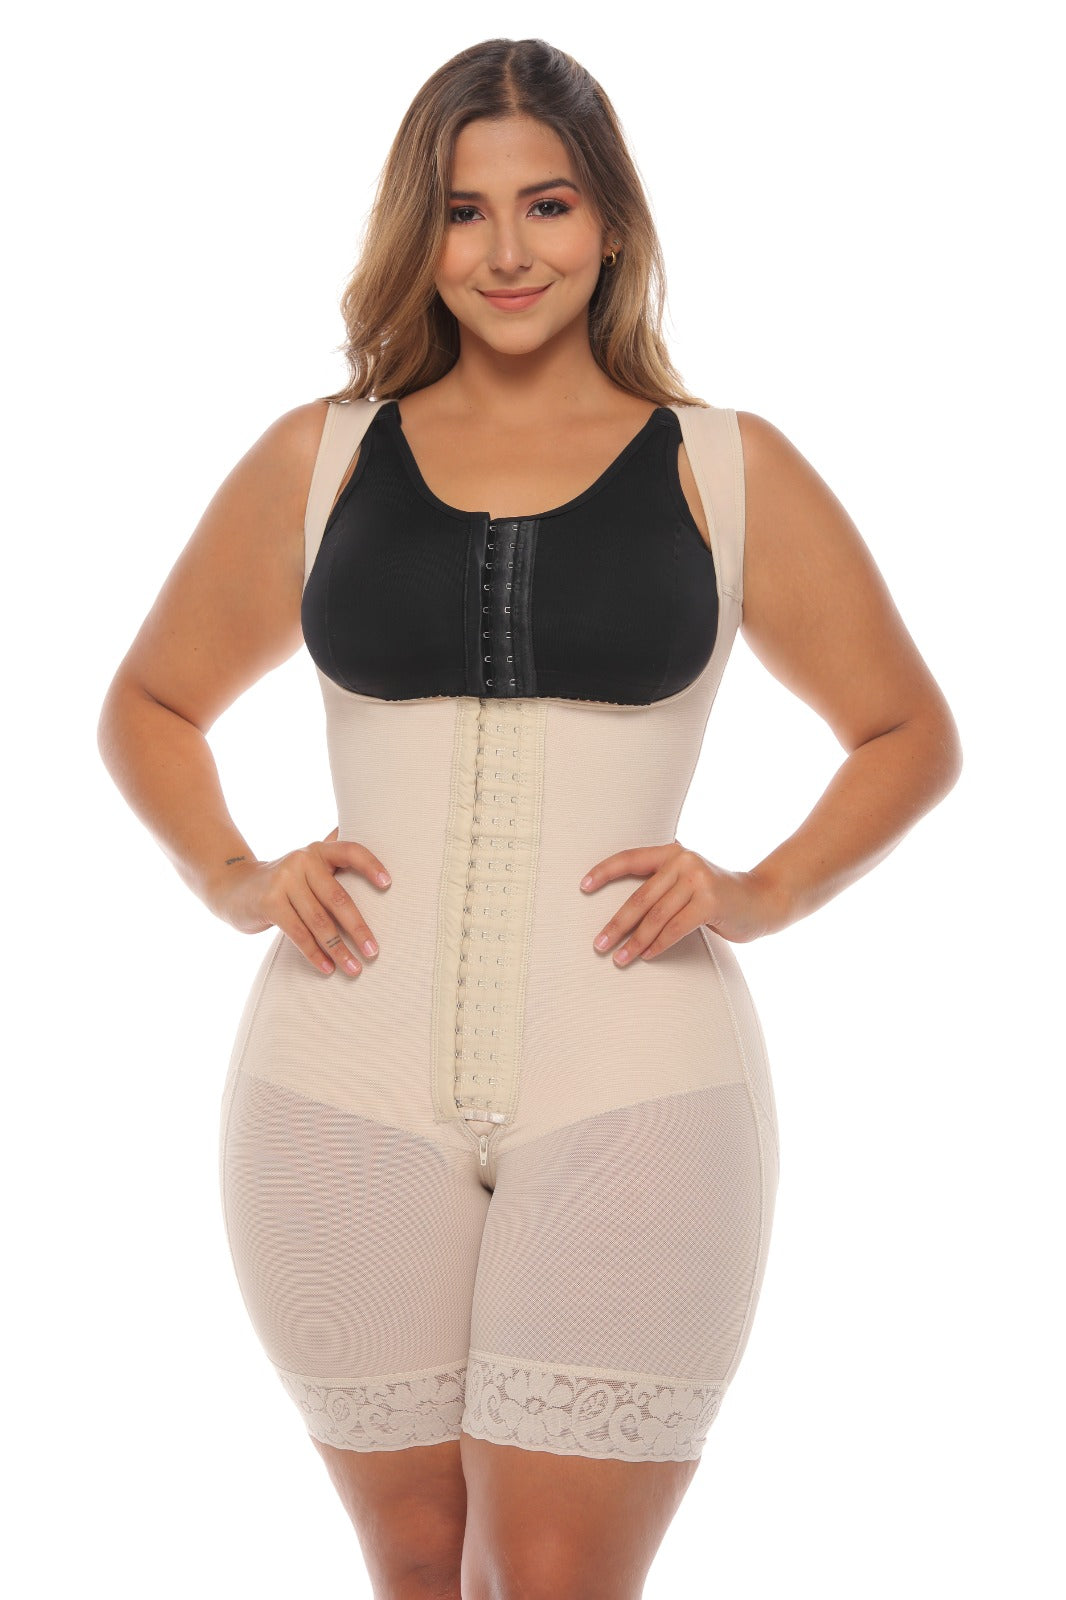 BODY SHAPERS